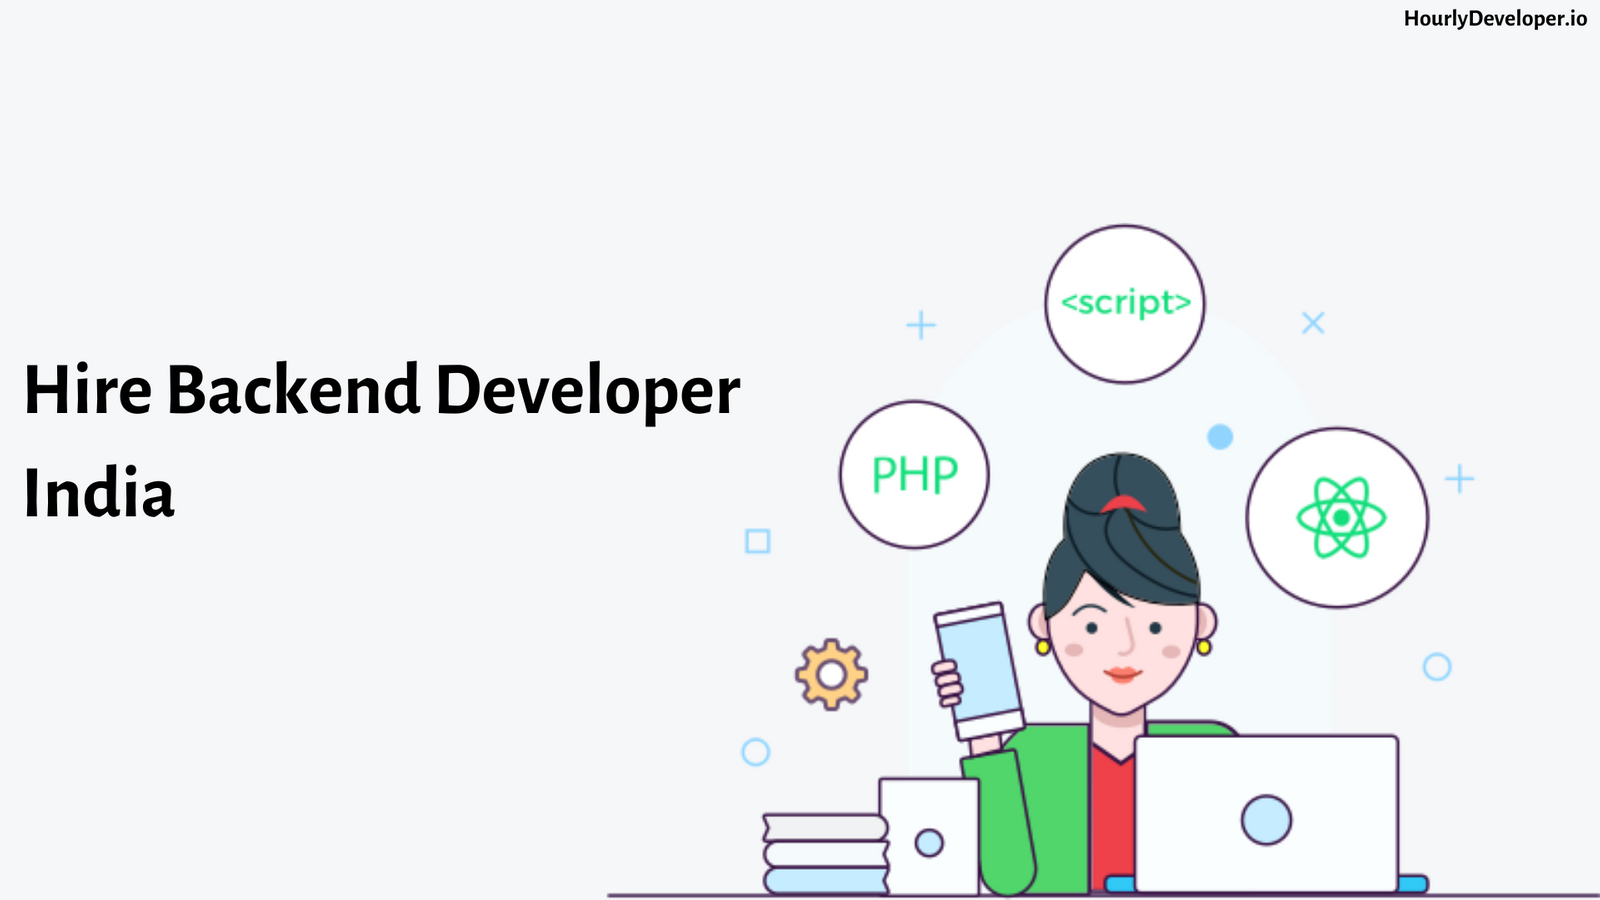 Hire Backend Developers India